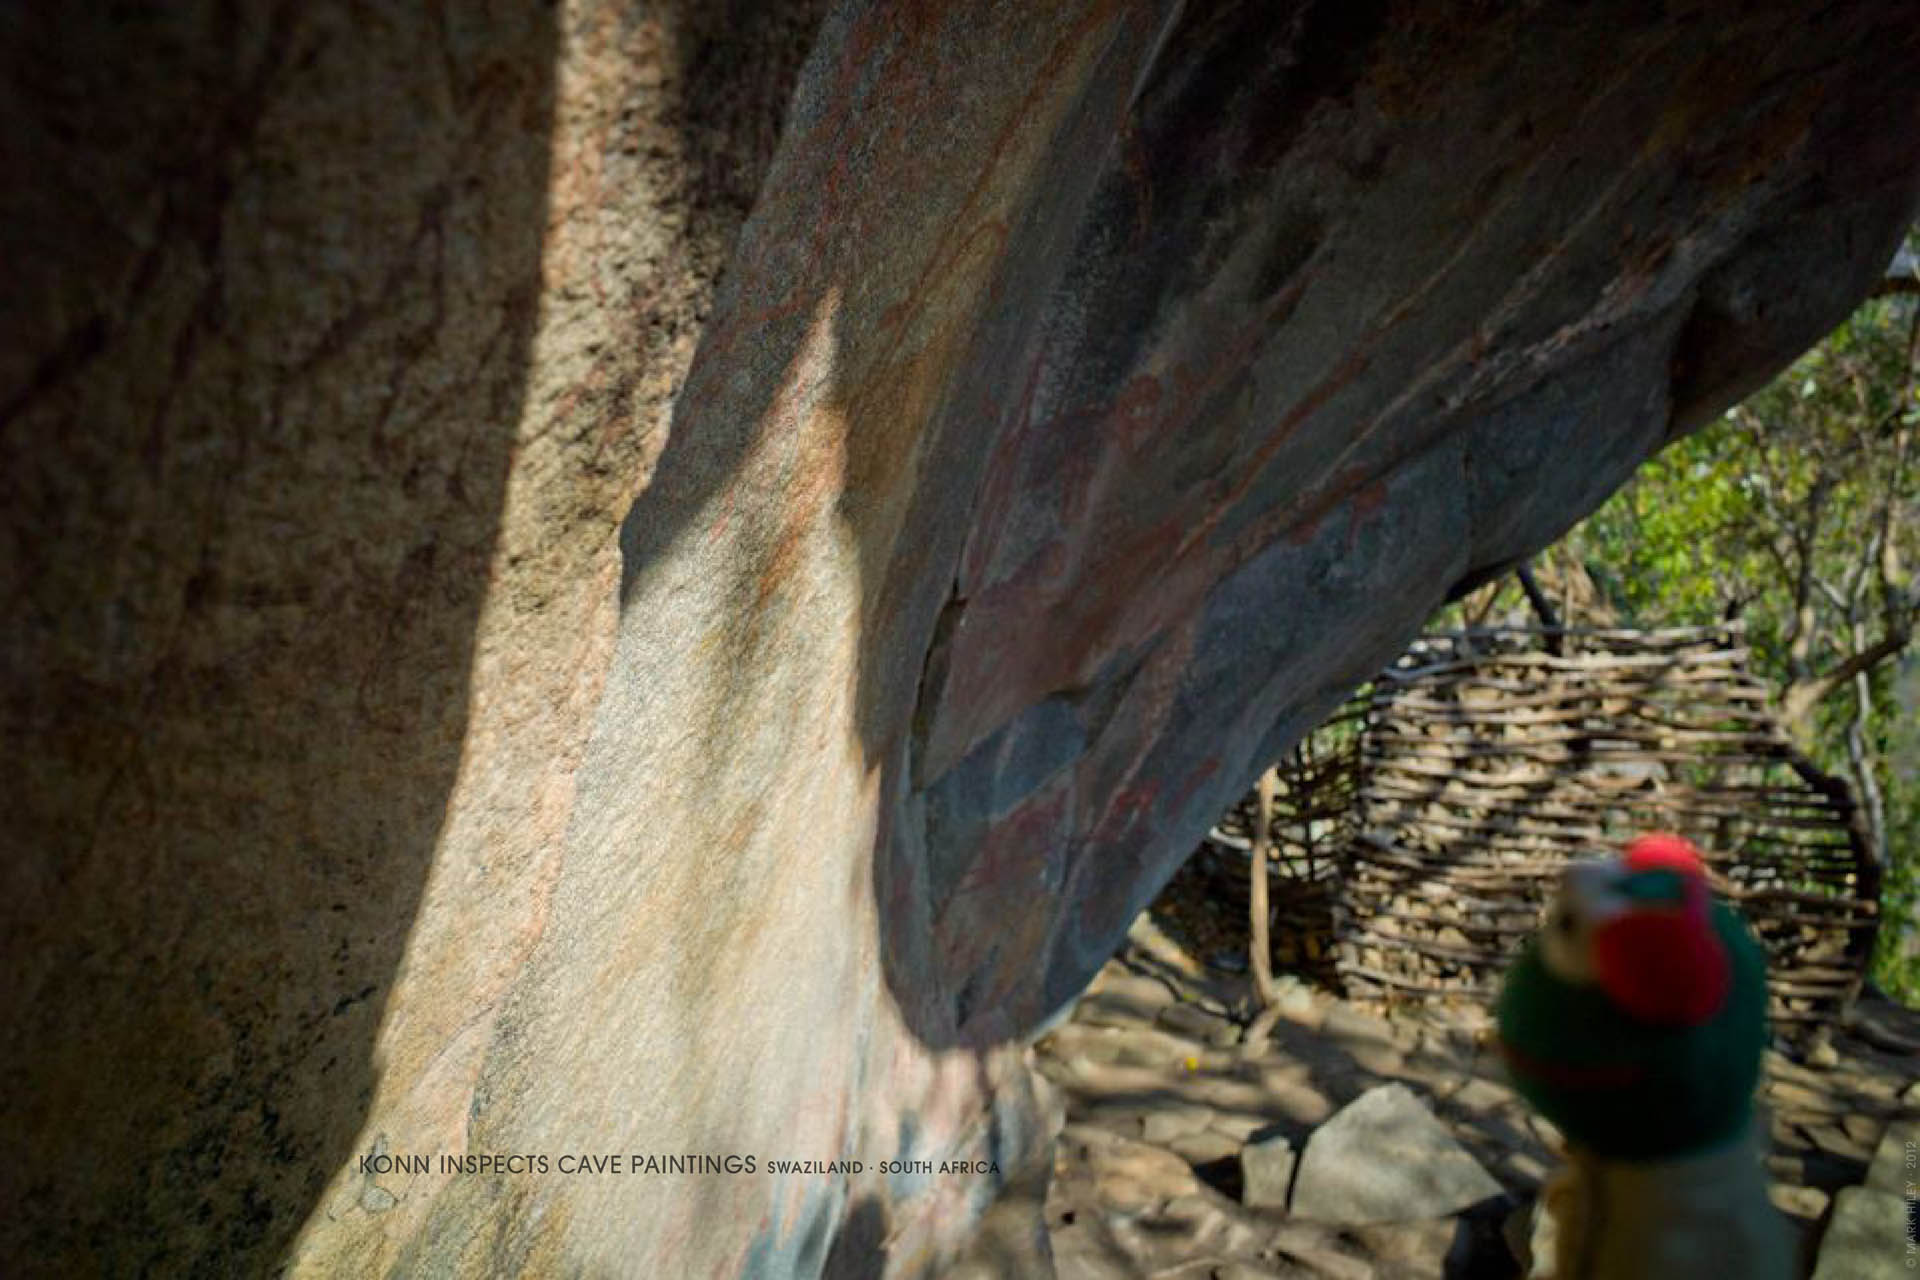 Mark Hiley's KONN THE FROG inspects cave paintings, Swaziland, South Africa